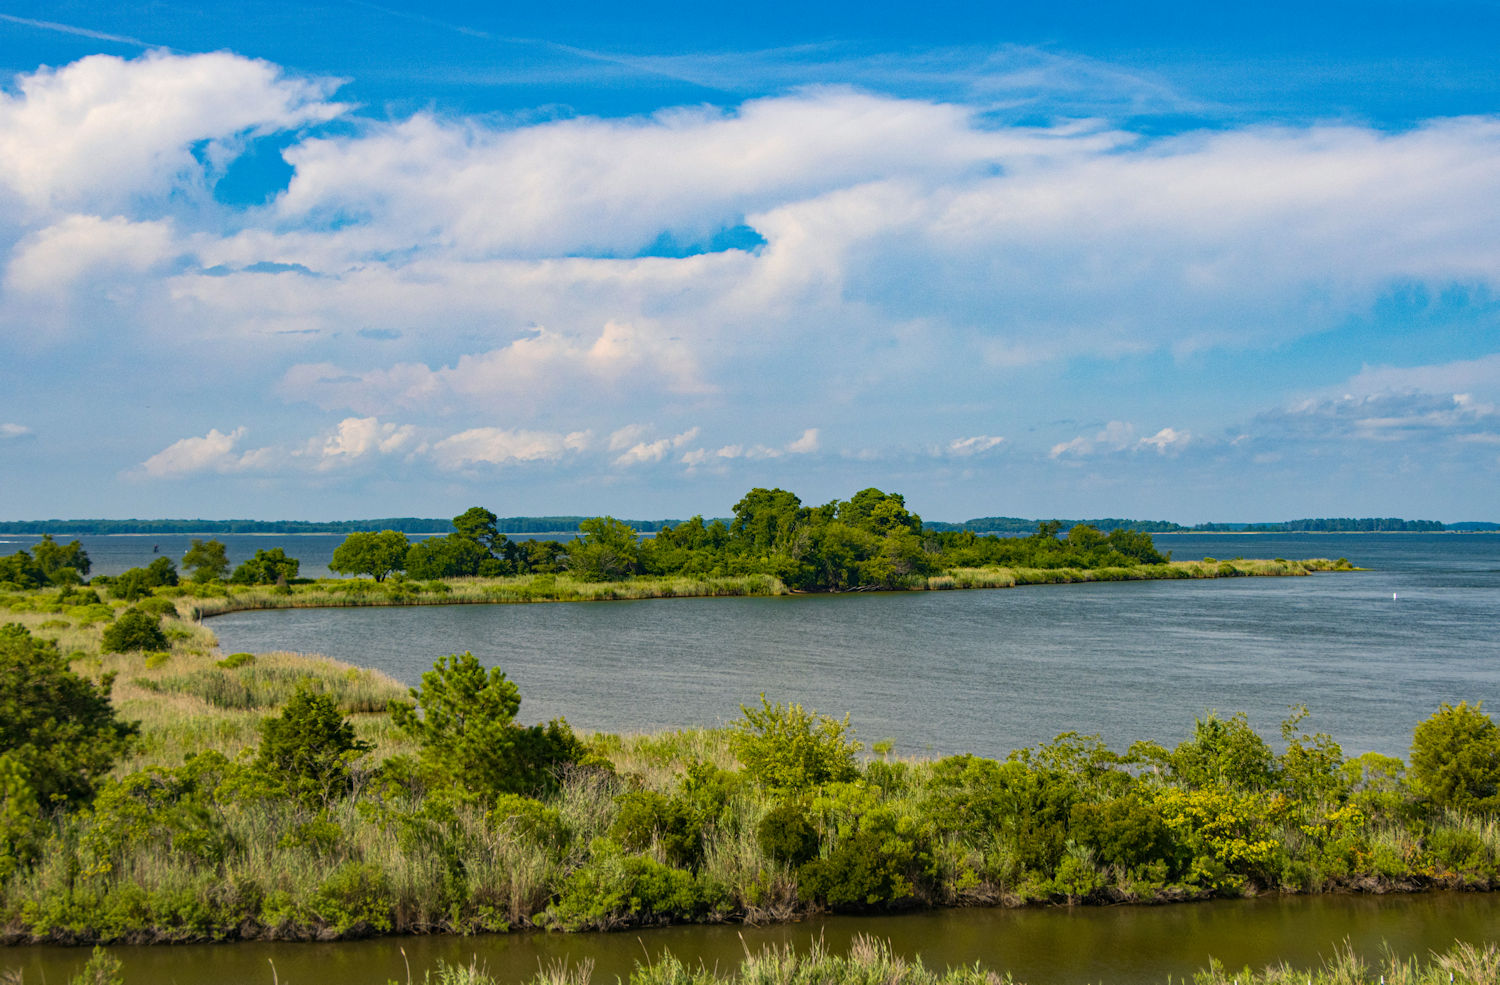 The water and sky view from the observation deck at Chesapeake Heritage and Visitor Center